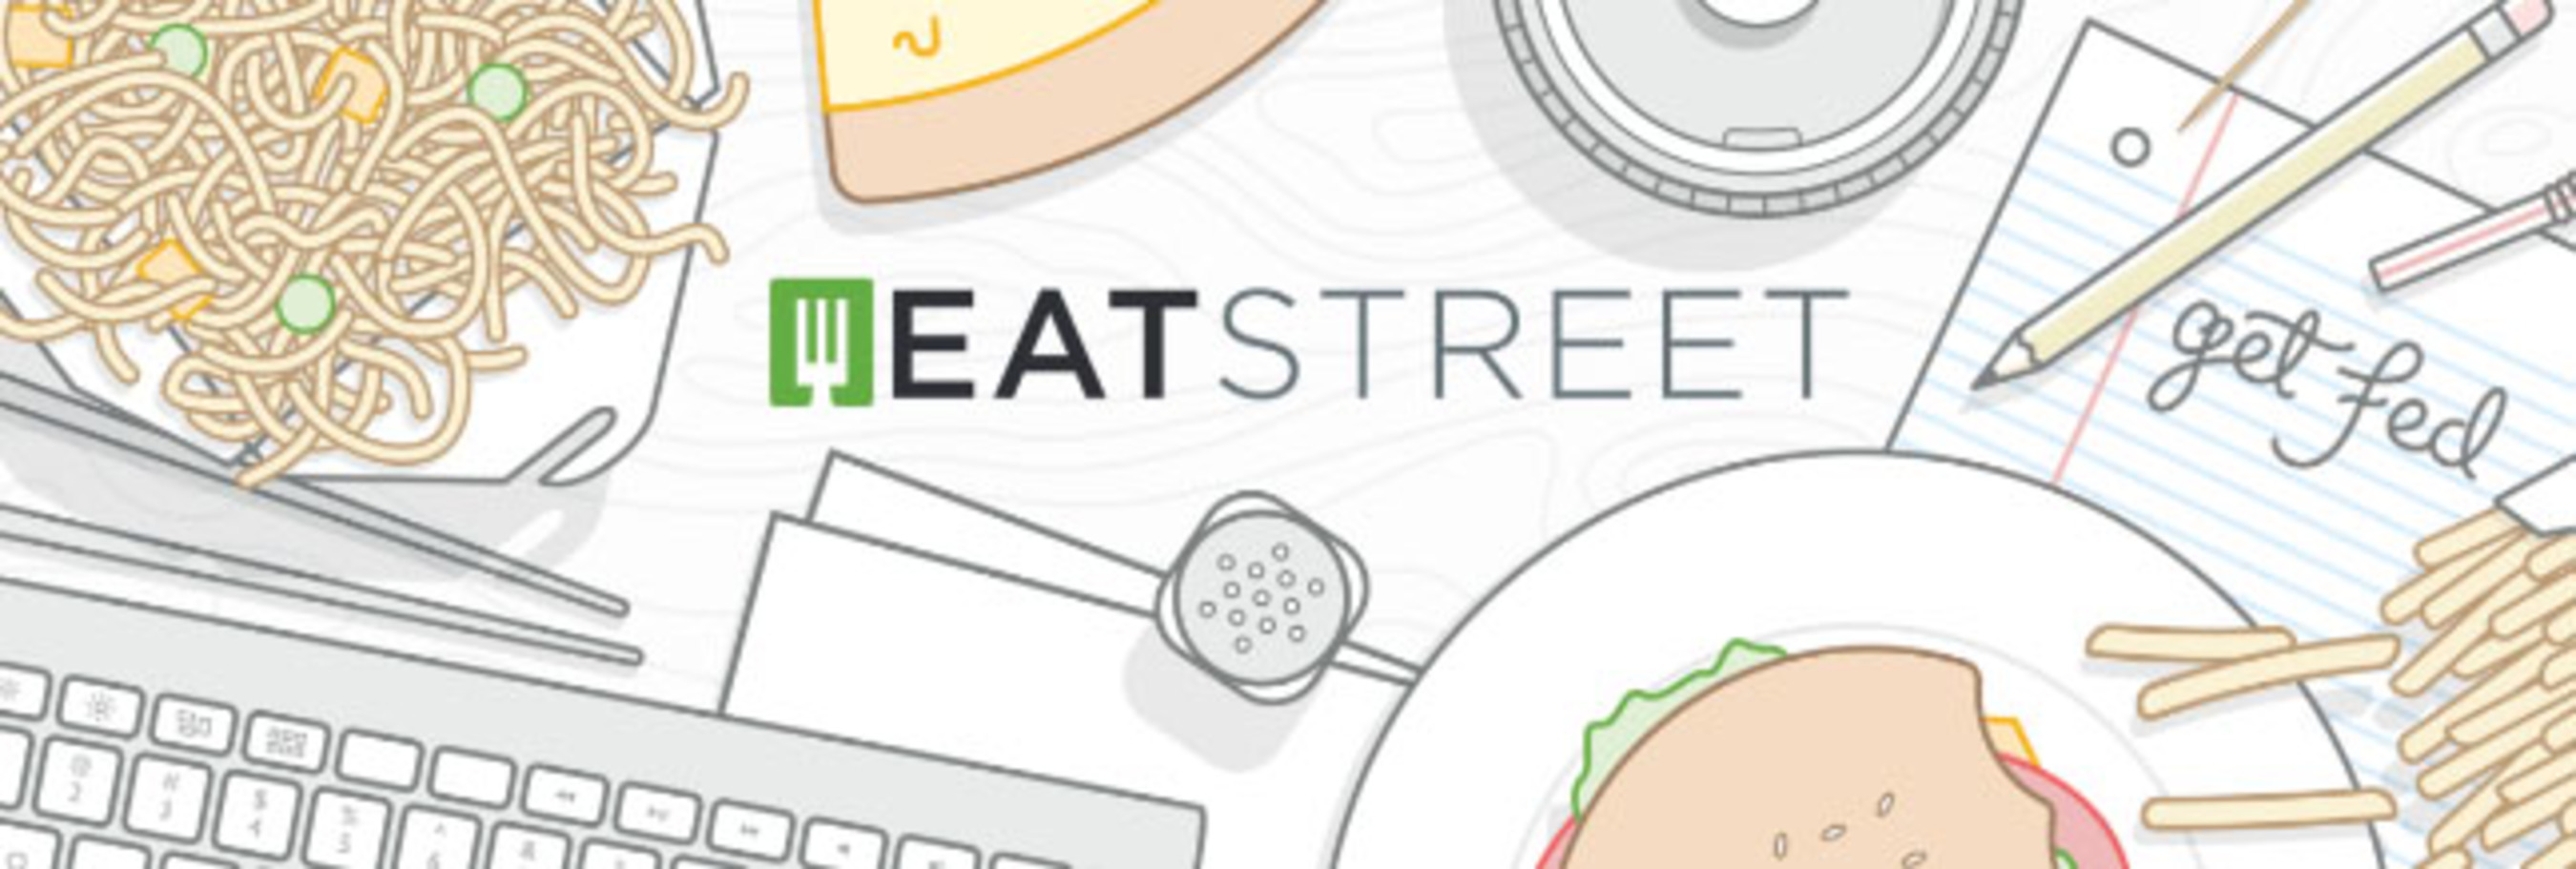 EatStreet is a burgeoning online and mobile food ordering service that streamlines commerce between restaurants and diners in 150 cities nationwide. (PRNewsFoto/EatStreet)